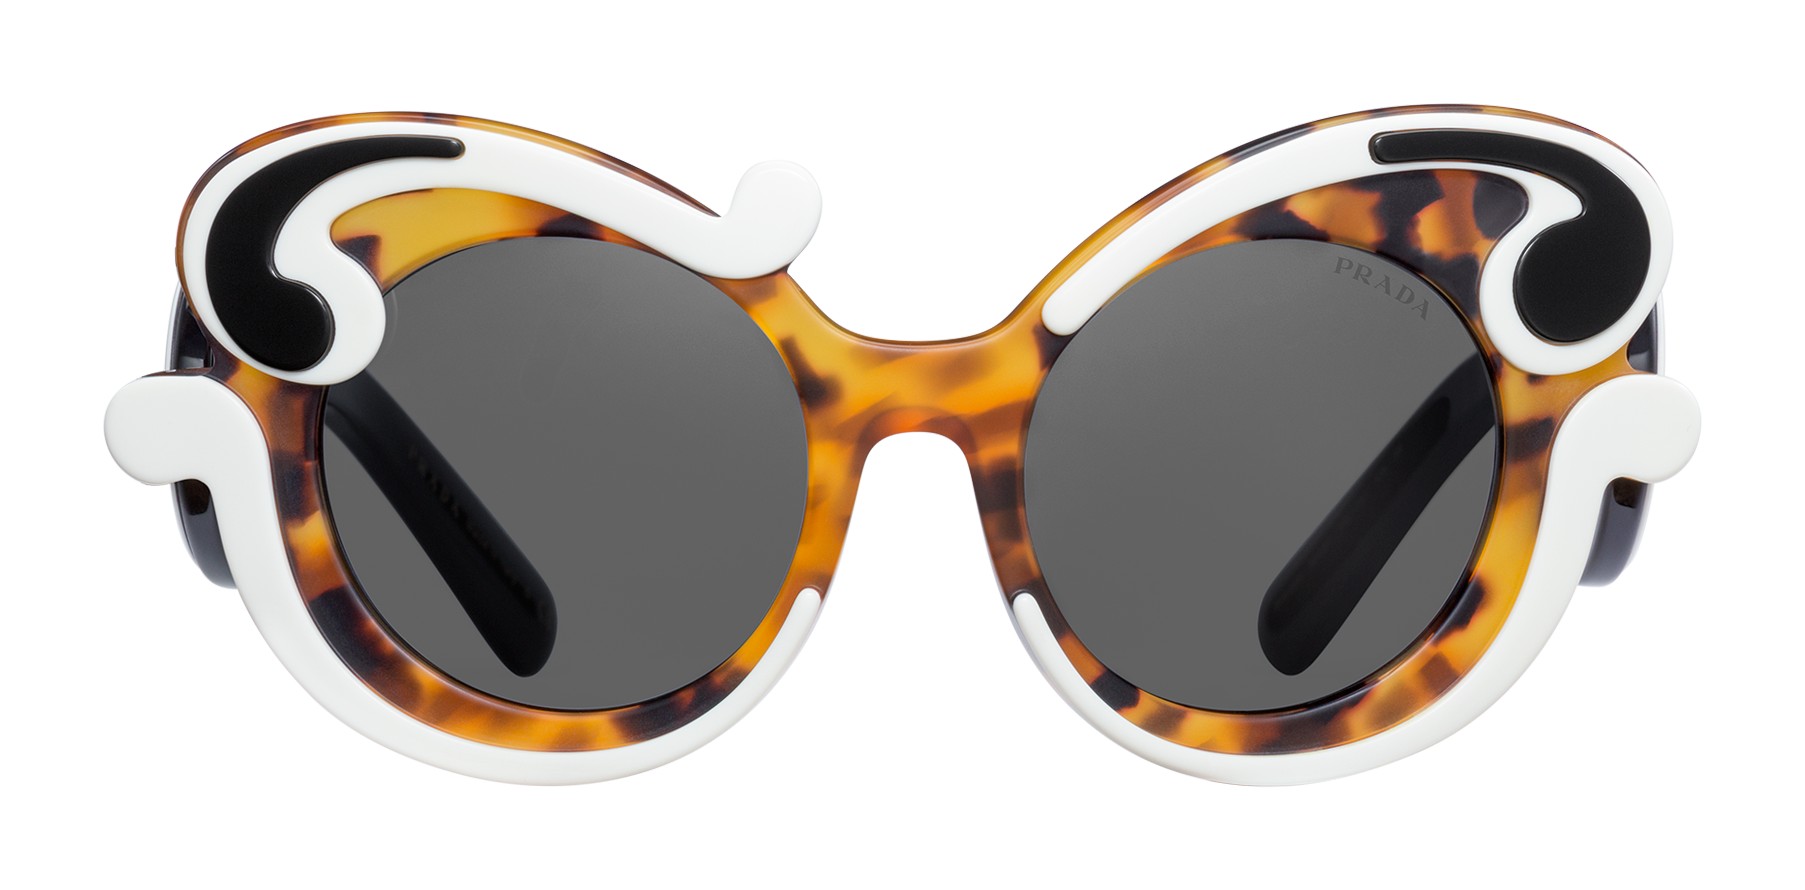 prada sunglasses with curly sides